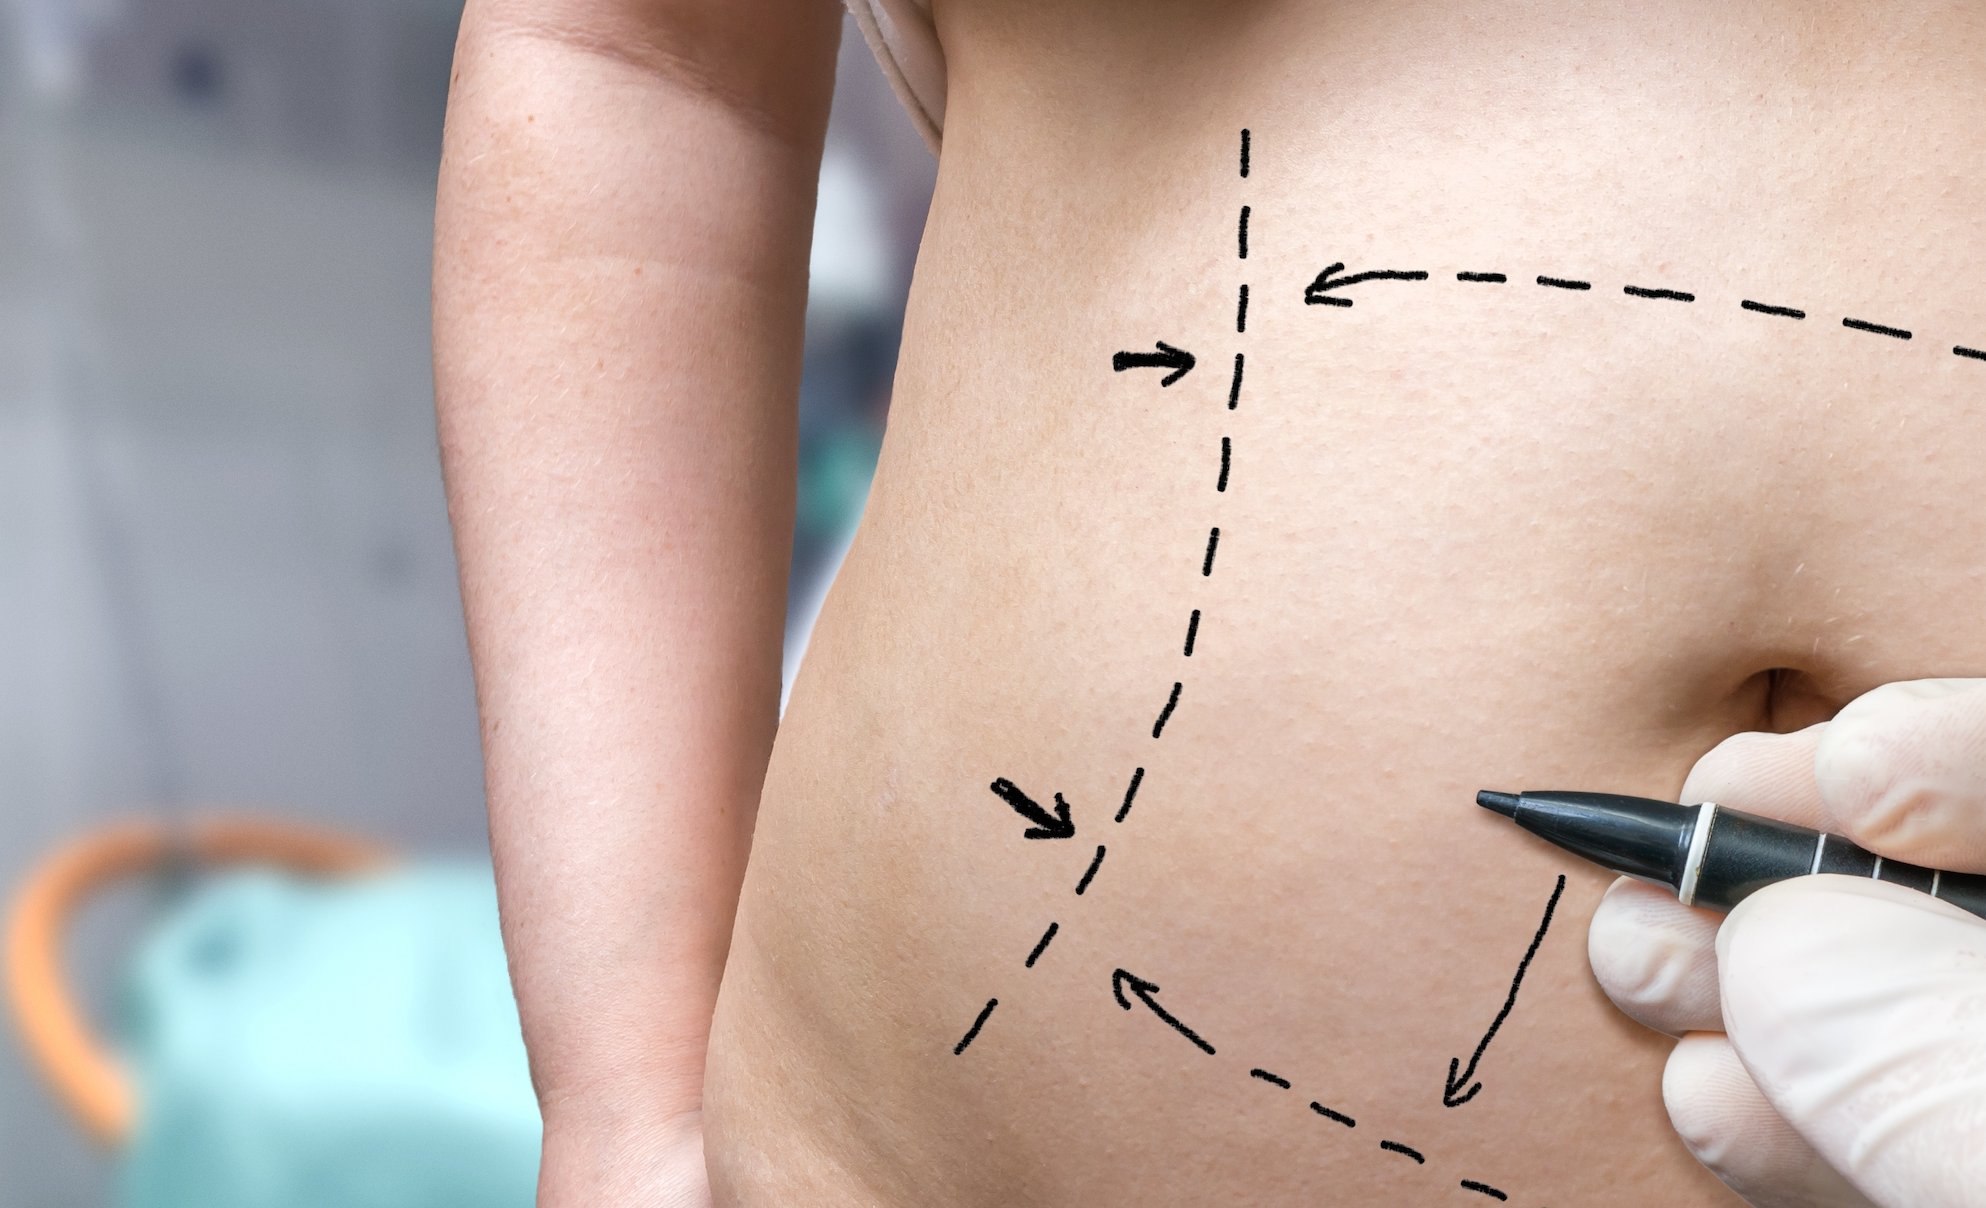 Tummy Tuck Recovery: Get A Glimpse Of The Healing Process